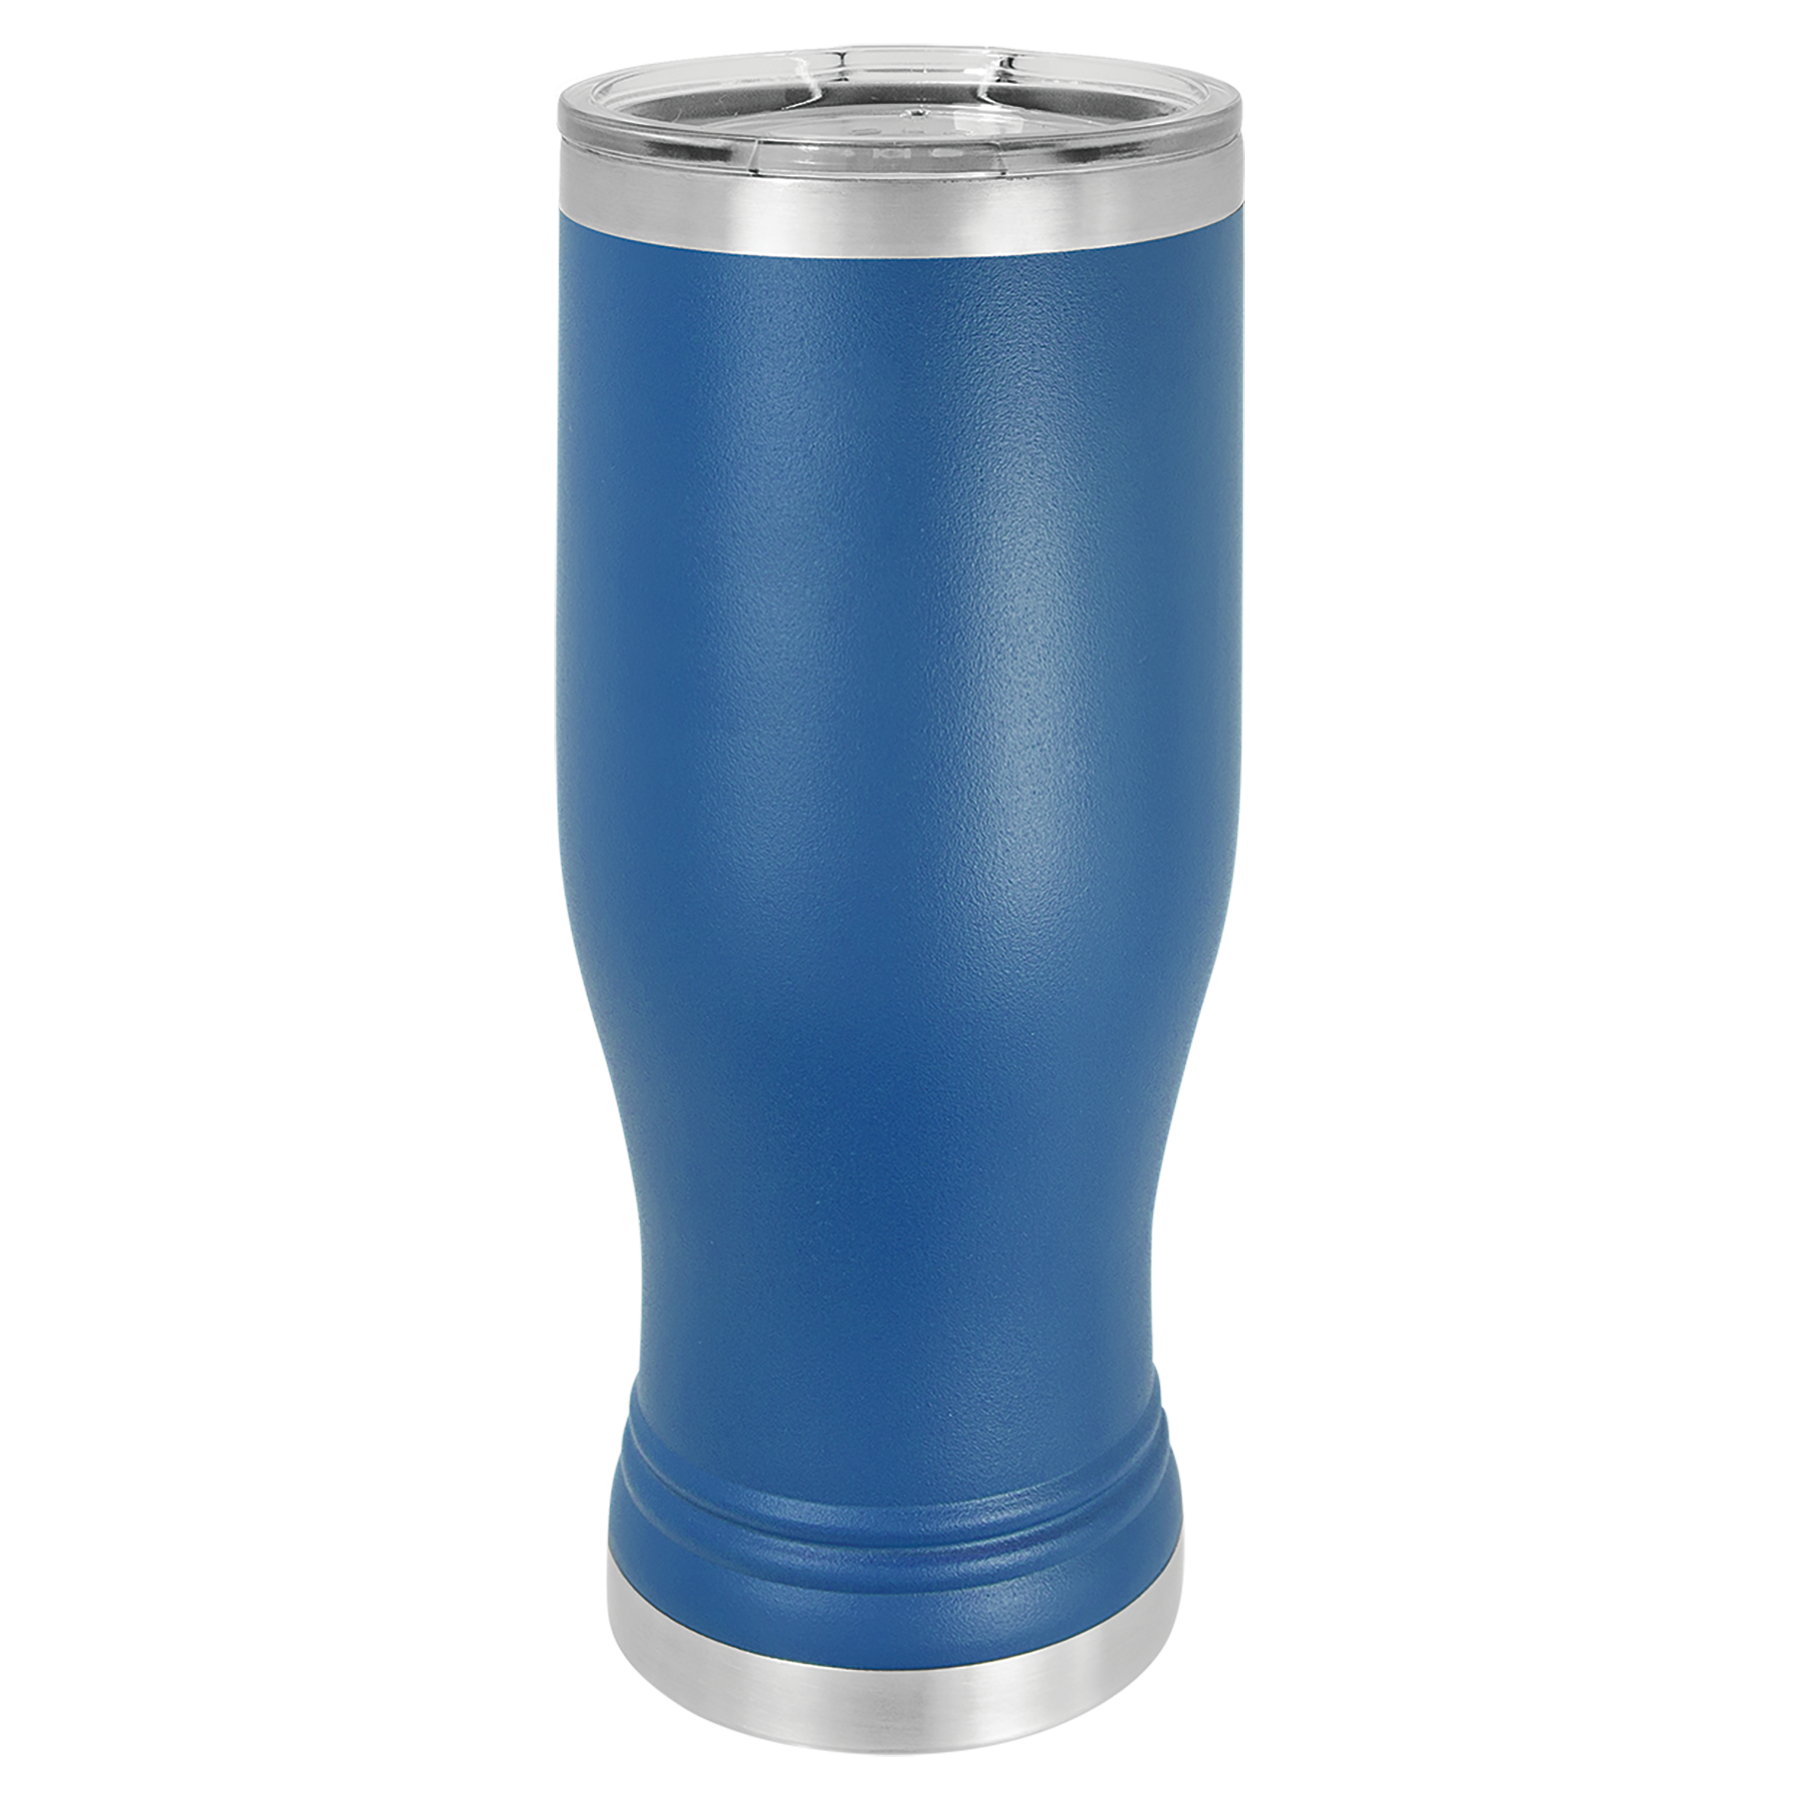 Royal Blue 20oz Pilsner Tumbler -One Free Engraving -Fits most Cup Holders -Double-wall Vacuum Insulated -Made from 18/8 Gauge Stainless Steel (Type 304 Food Grade) -Lid is BPA Free (Hand Wash Only) -Not recommended for Dishwasher -Works with Cold and Hot Drinks -17 Color Options -Perfect for Personalized Gifts, Awards, Incentives, Swag & Fundraisers